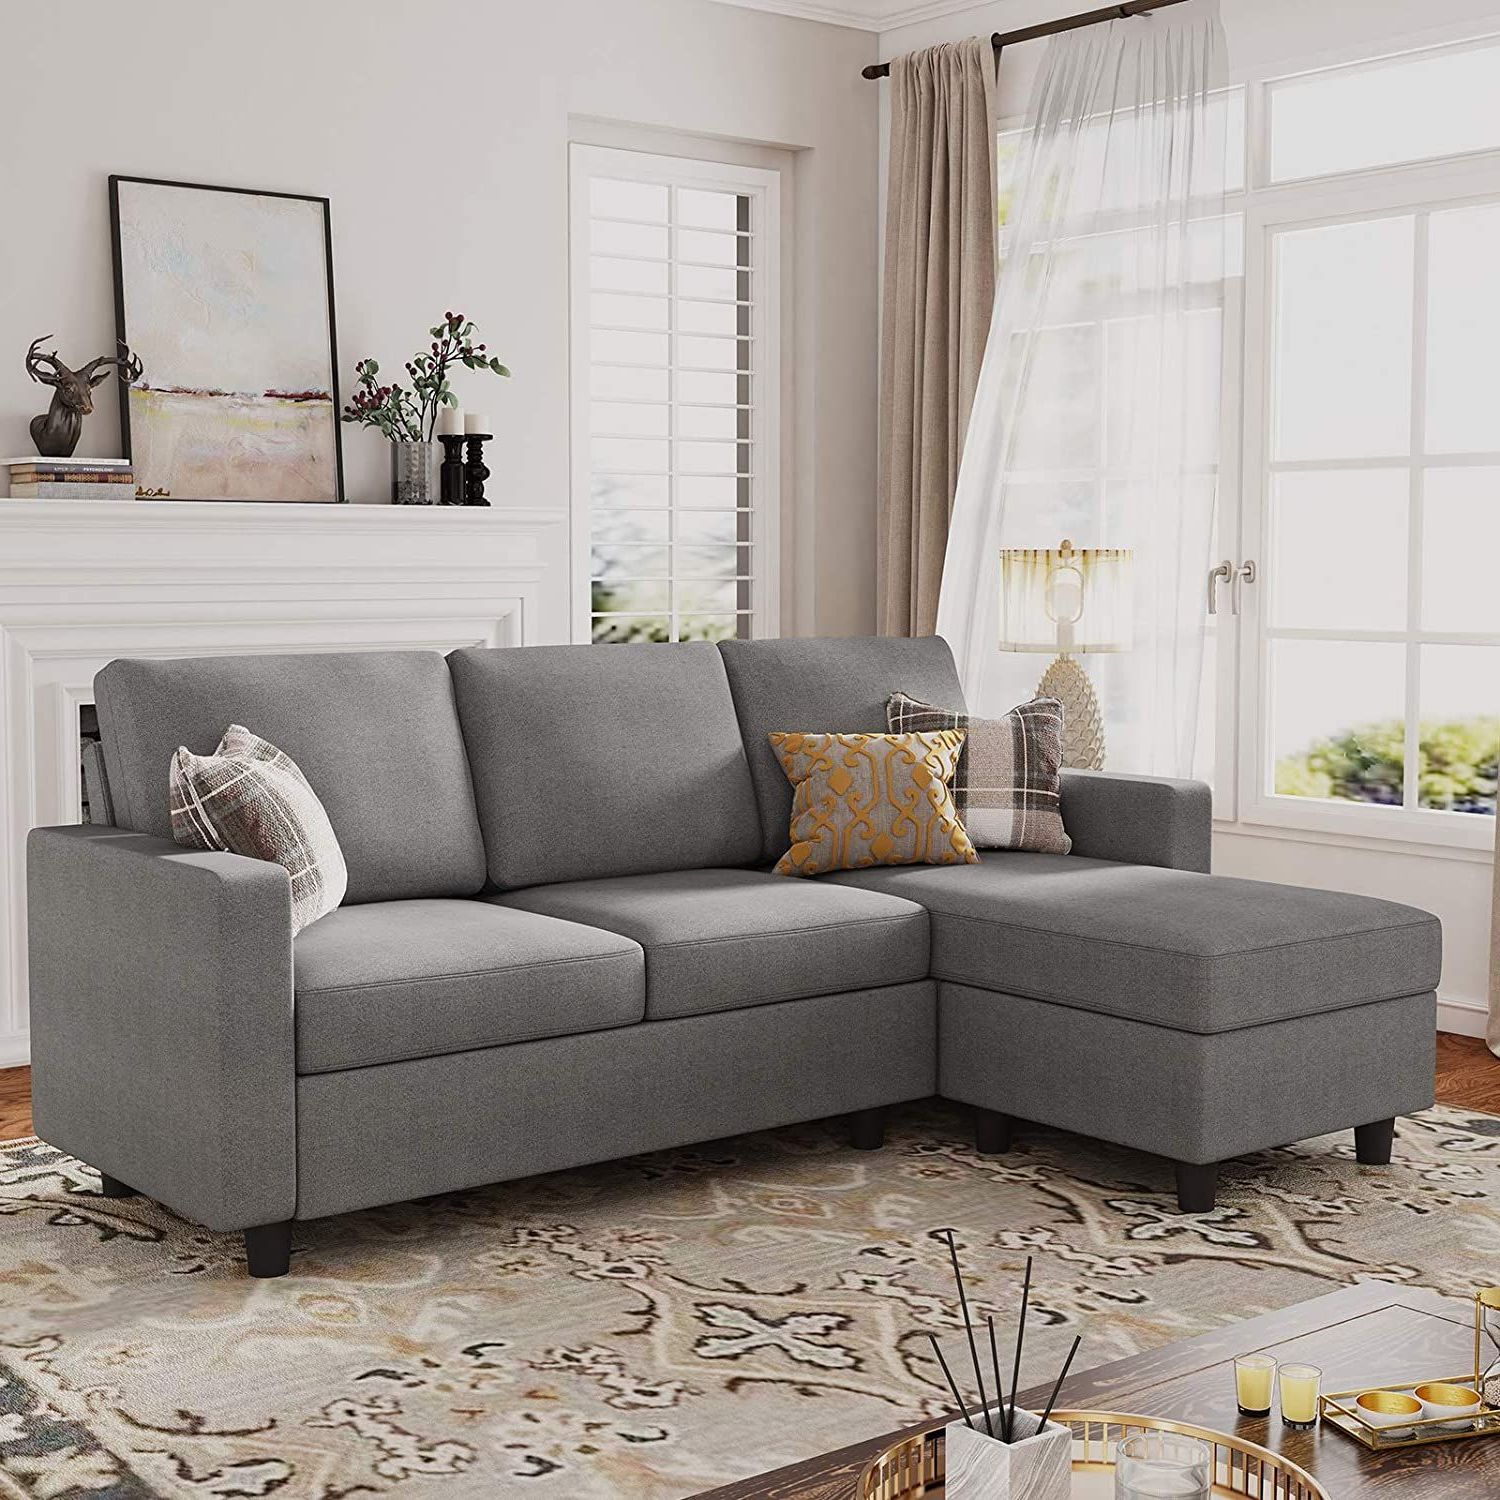 Honbay Dryades L Shaped Sectional Sofa, Gray Fabric – Walmart | Sofas  For Small Spaces, Couches For Small Spaces, Sectional Sofa Couch For L Shapped Apartment Sofas (Gallery 6 of 20)